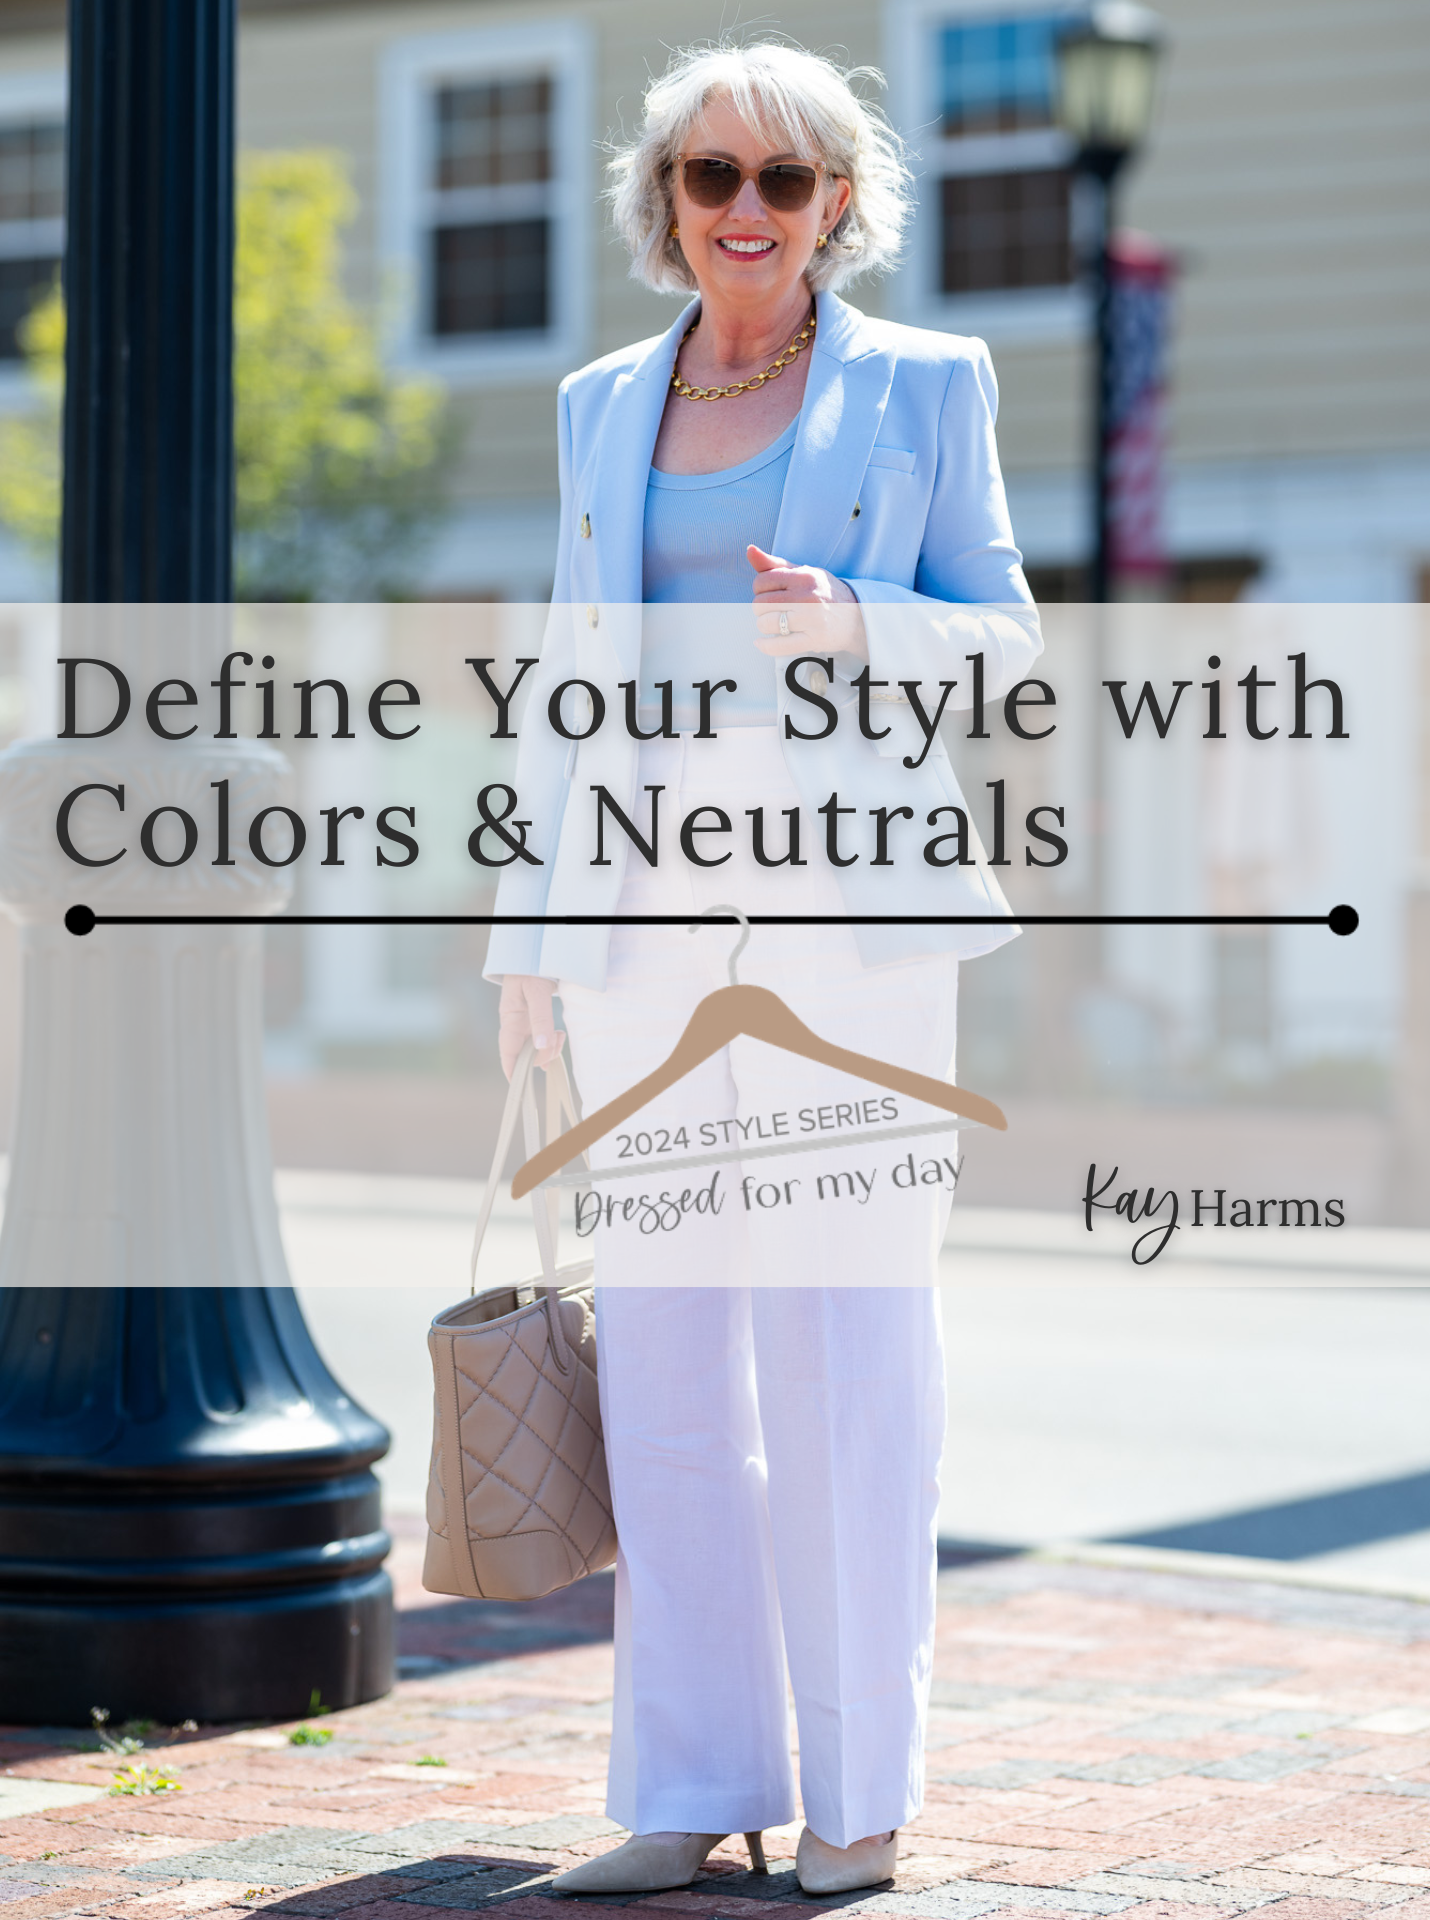 Define Your Style with Colors & Neutrals